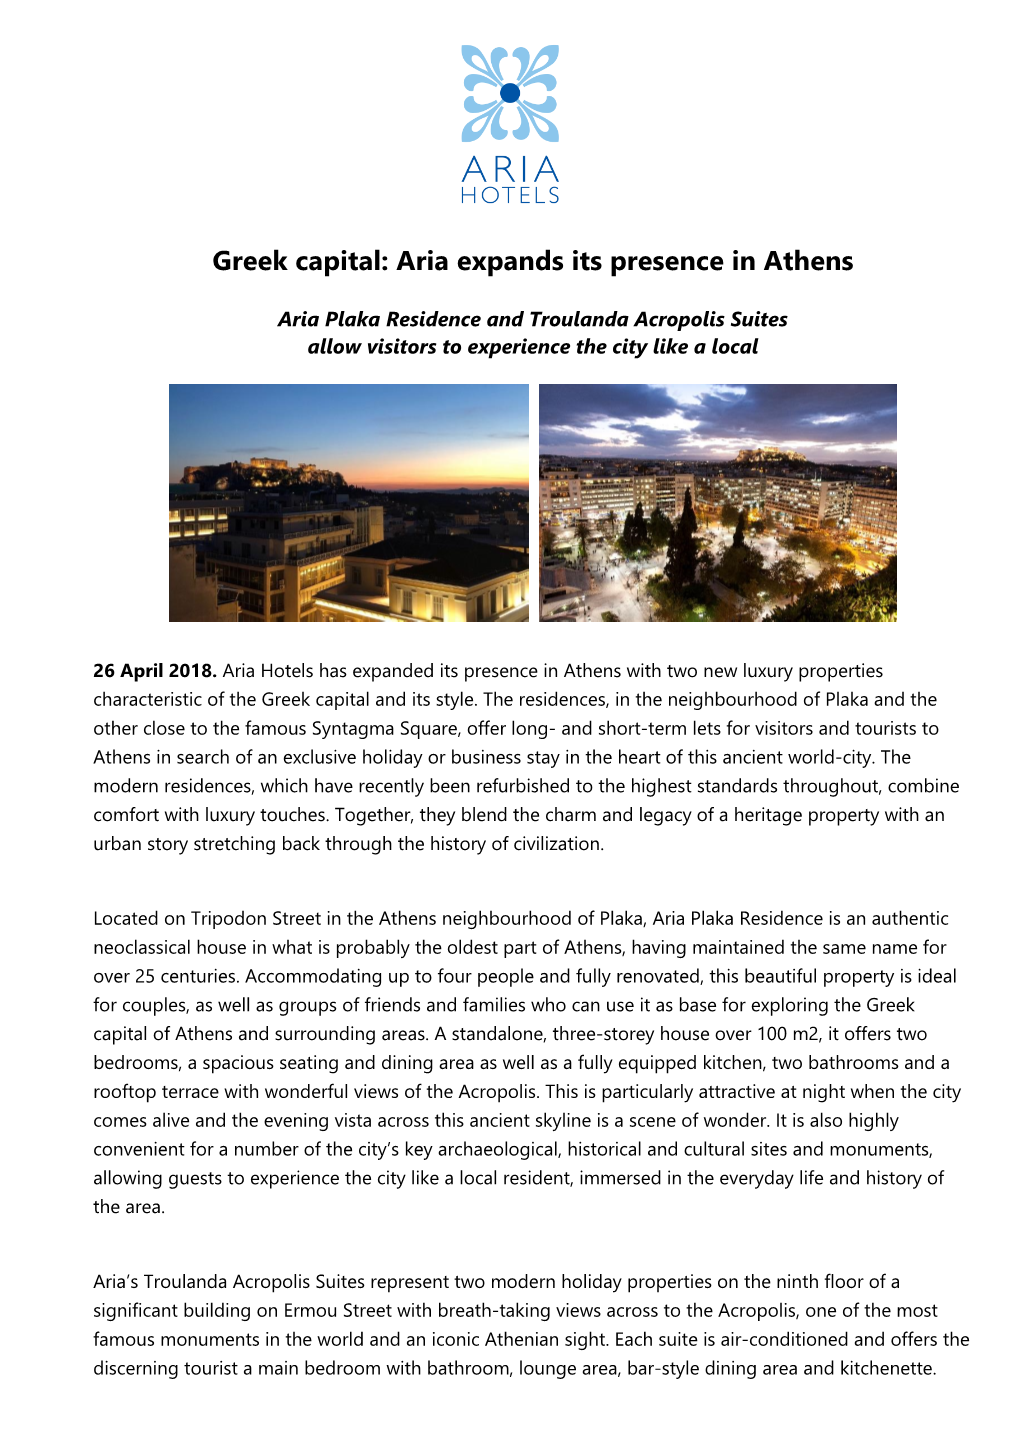 Greek Capital: Aria Expands Its Presence in Athens